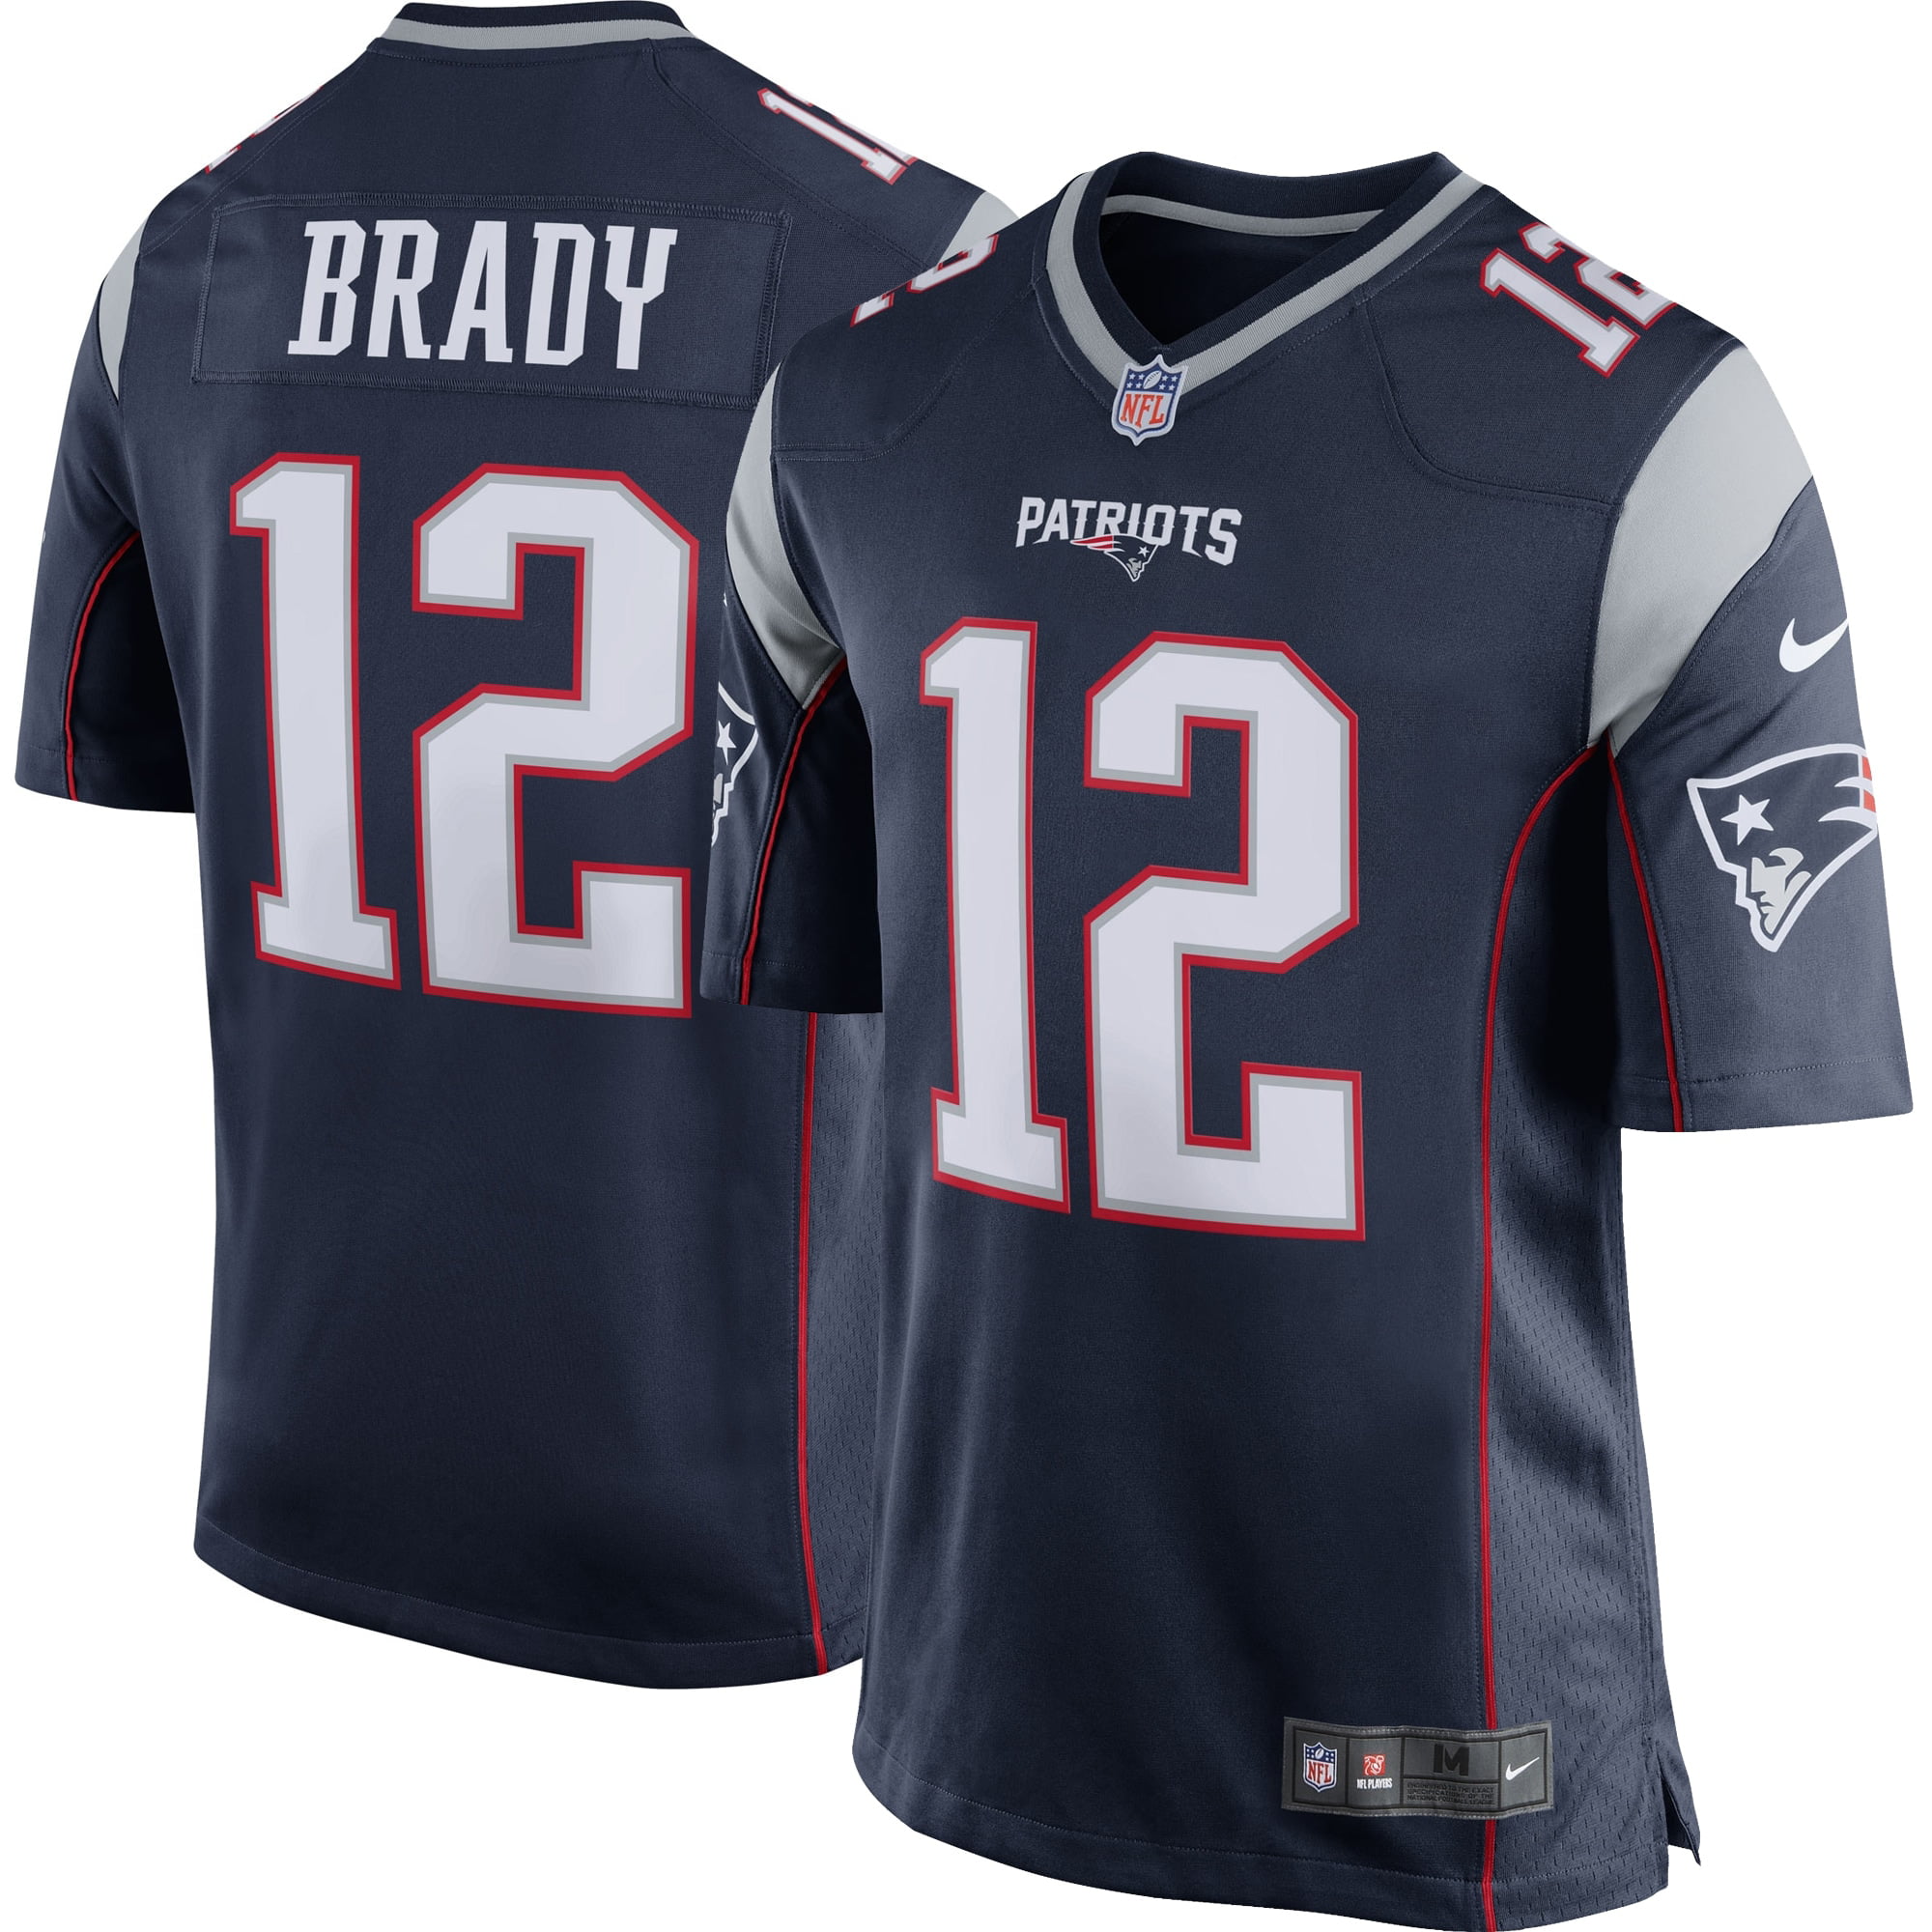 patriots home game jersey